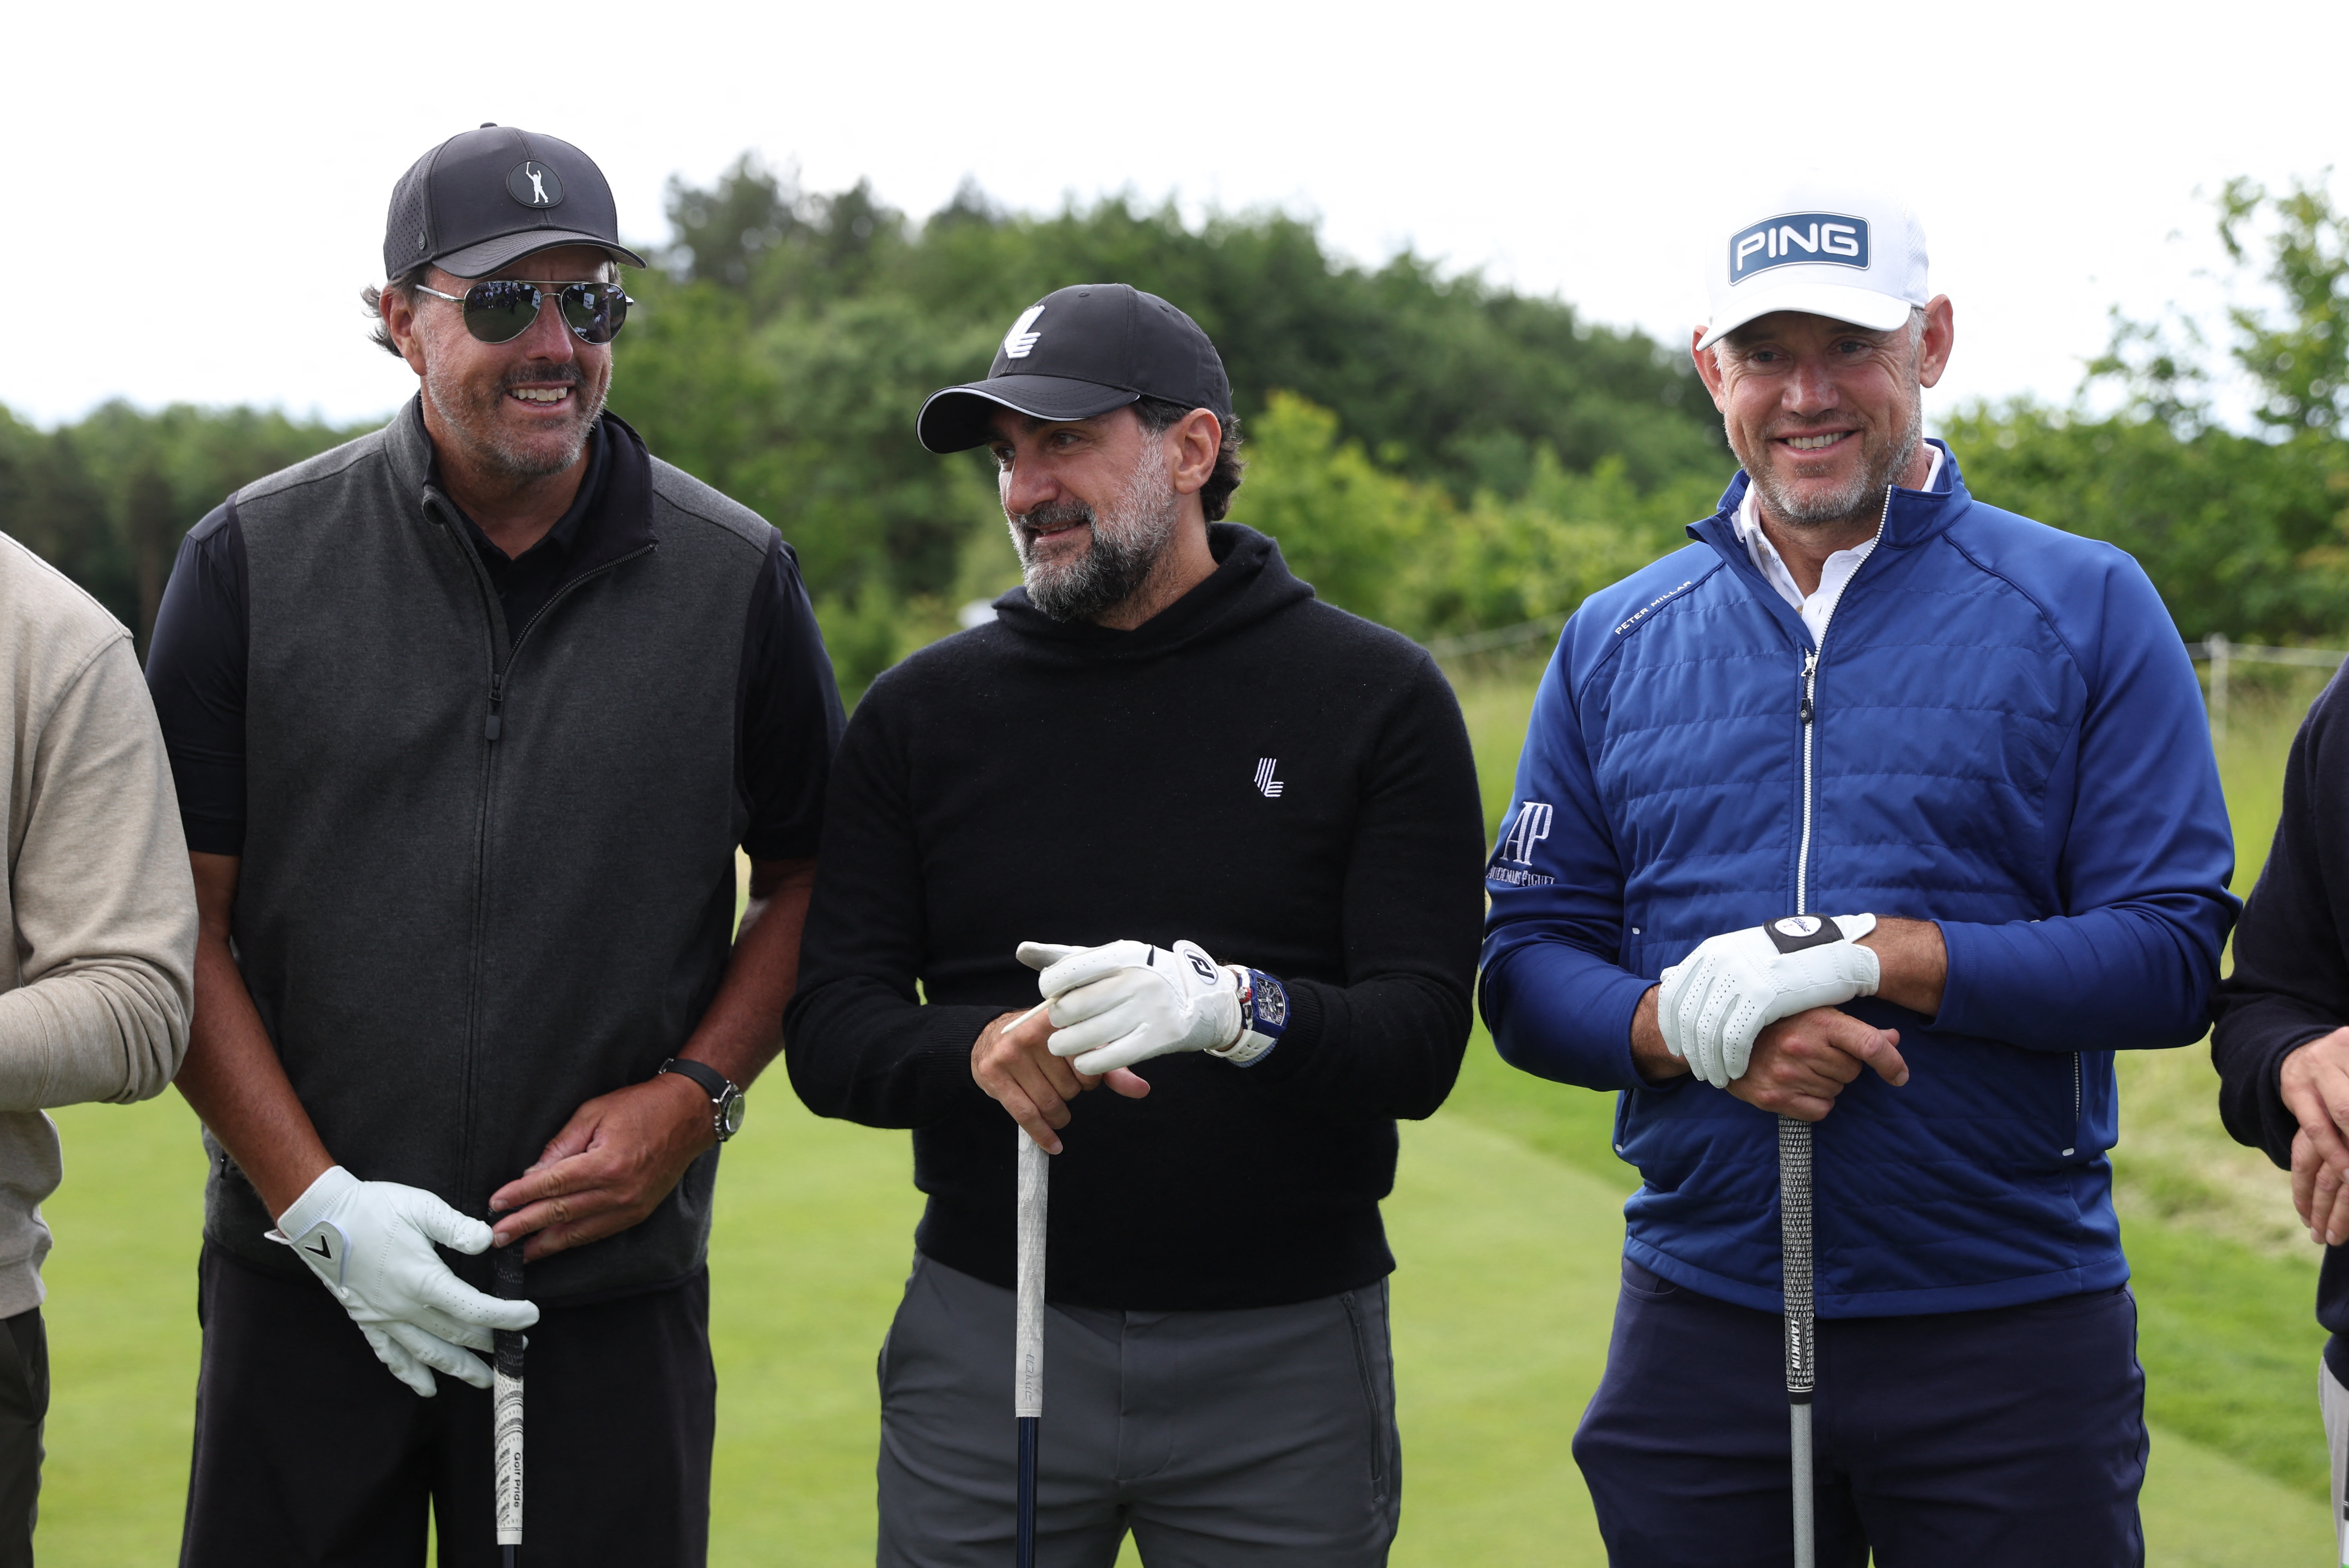 Golf - The inaugural LIV Golf Invitational - Centurion Club, Hemel Hempstead, St Albans, Britain - June 8, 2022 Phil Mickelson of the U.S. and England's Lee Westwood pose with Newcastle United chairman Yasir Al-Rumayyan before the Pro-Am Action Images via Reuters/Paul Childs